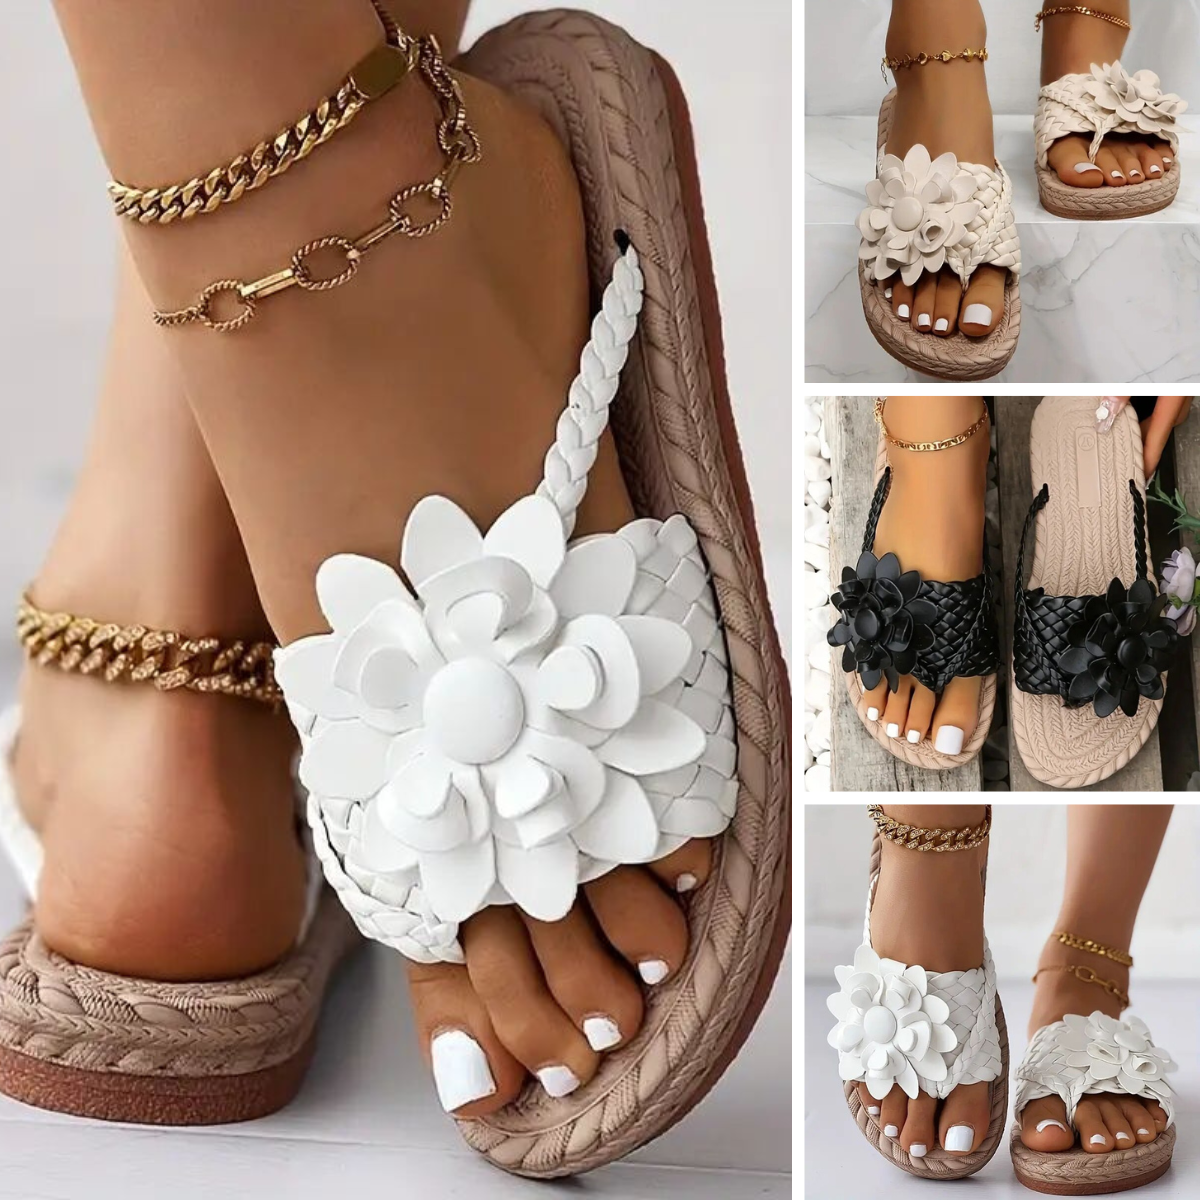 Bettie - 2023 Orthopaedic slippers in boho style with flowers